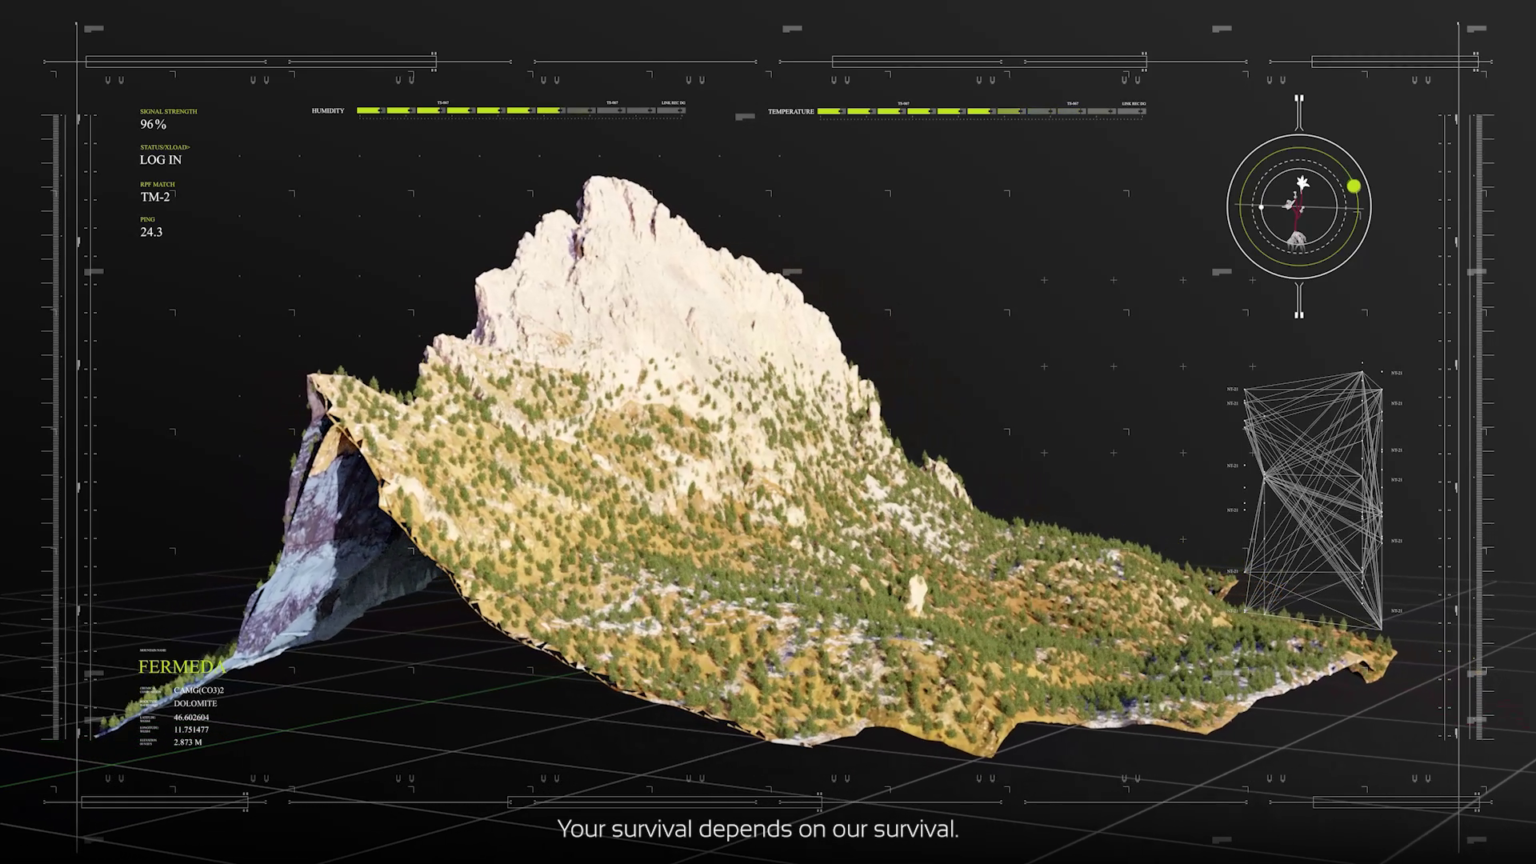 A still from a CGI video essay. The background is black with small white lines marking out space, and navigation tools at the side of the screen. A 3D model of a mountain is in the centre, with green plants growing among white and grey rock.